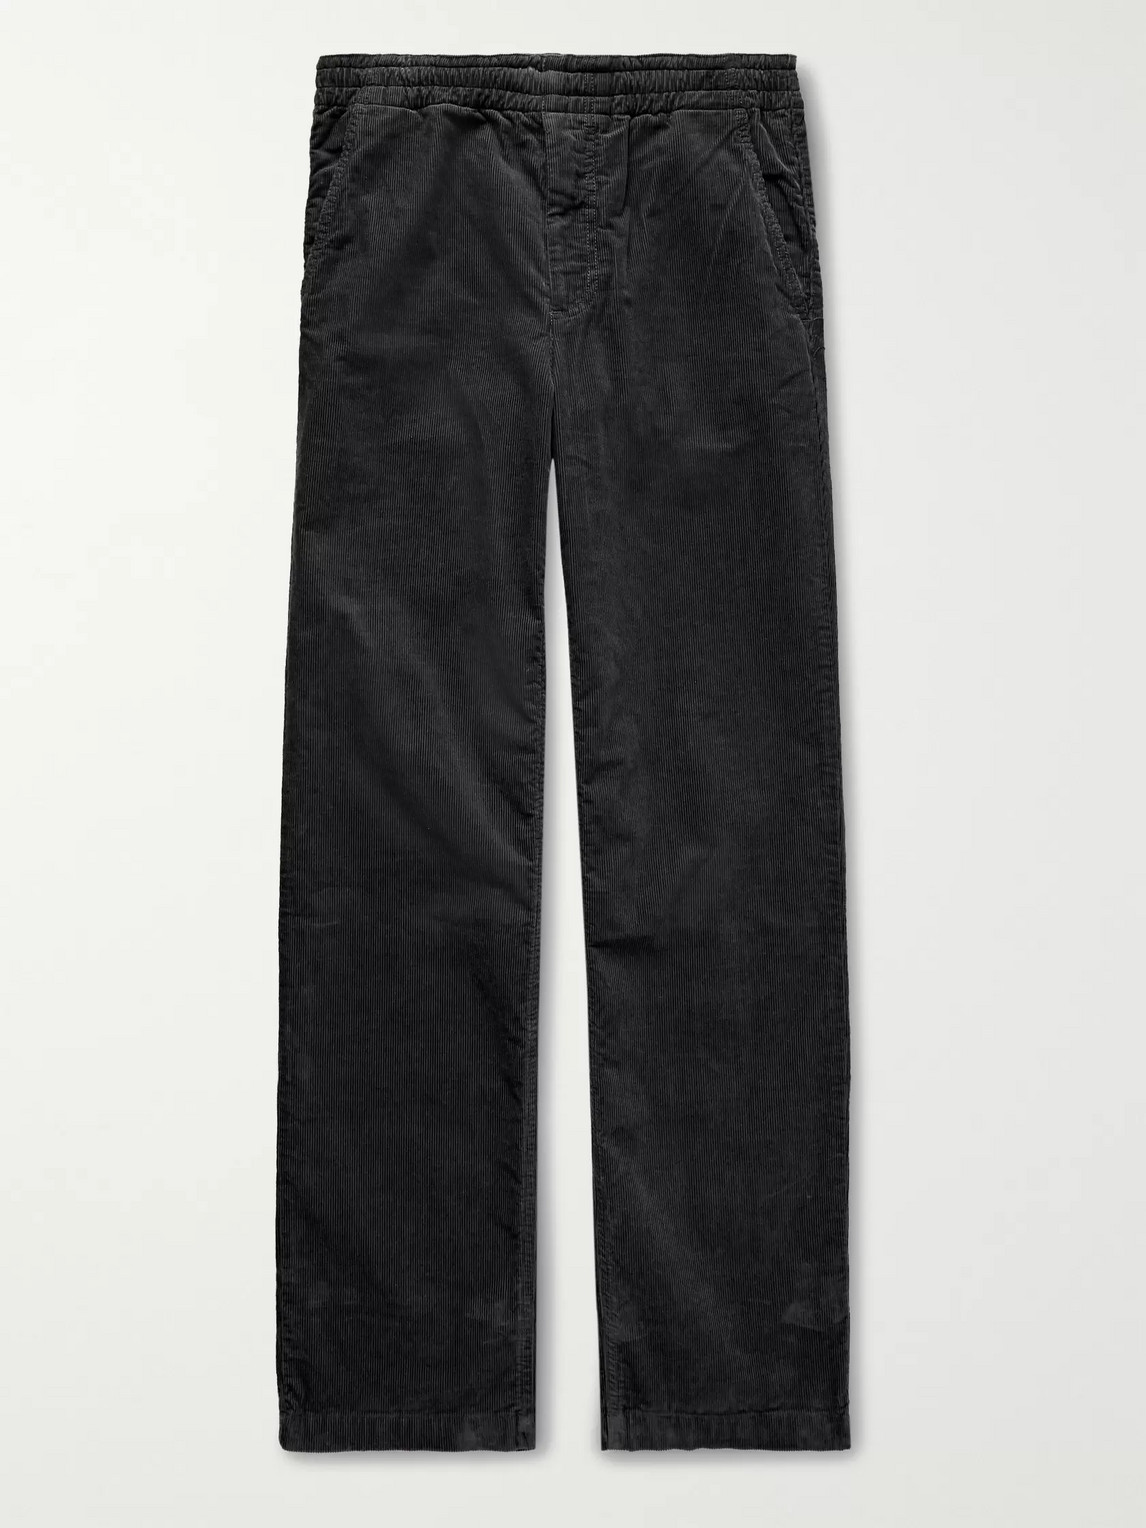 NORSE PROJECTS CHARCOAL EVALD COTTON-CORDUROY DRAWSTRING TROUSERS